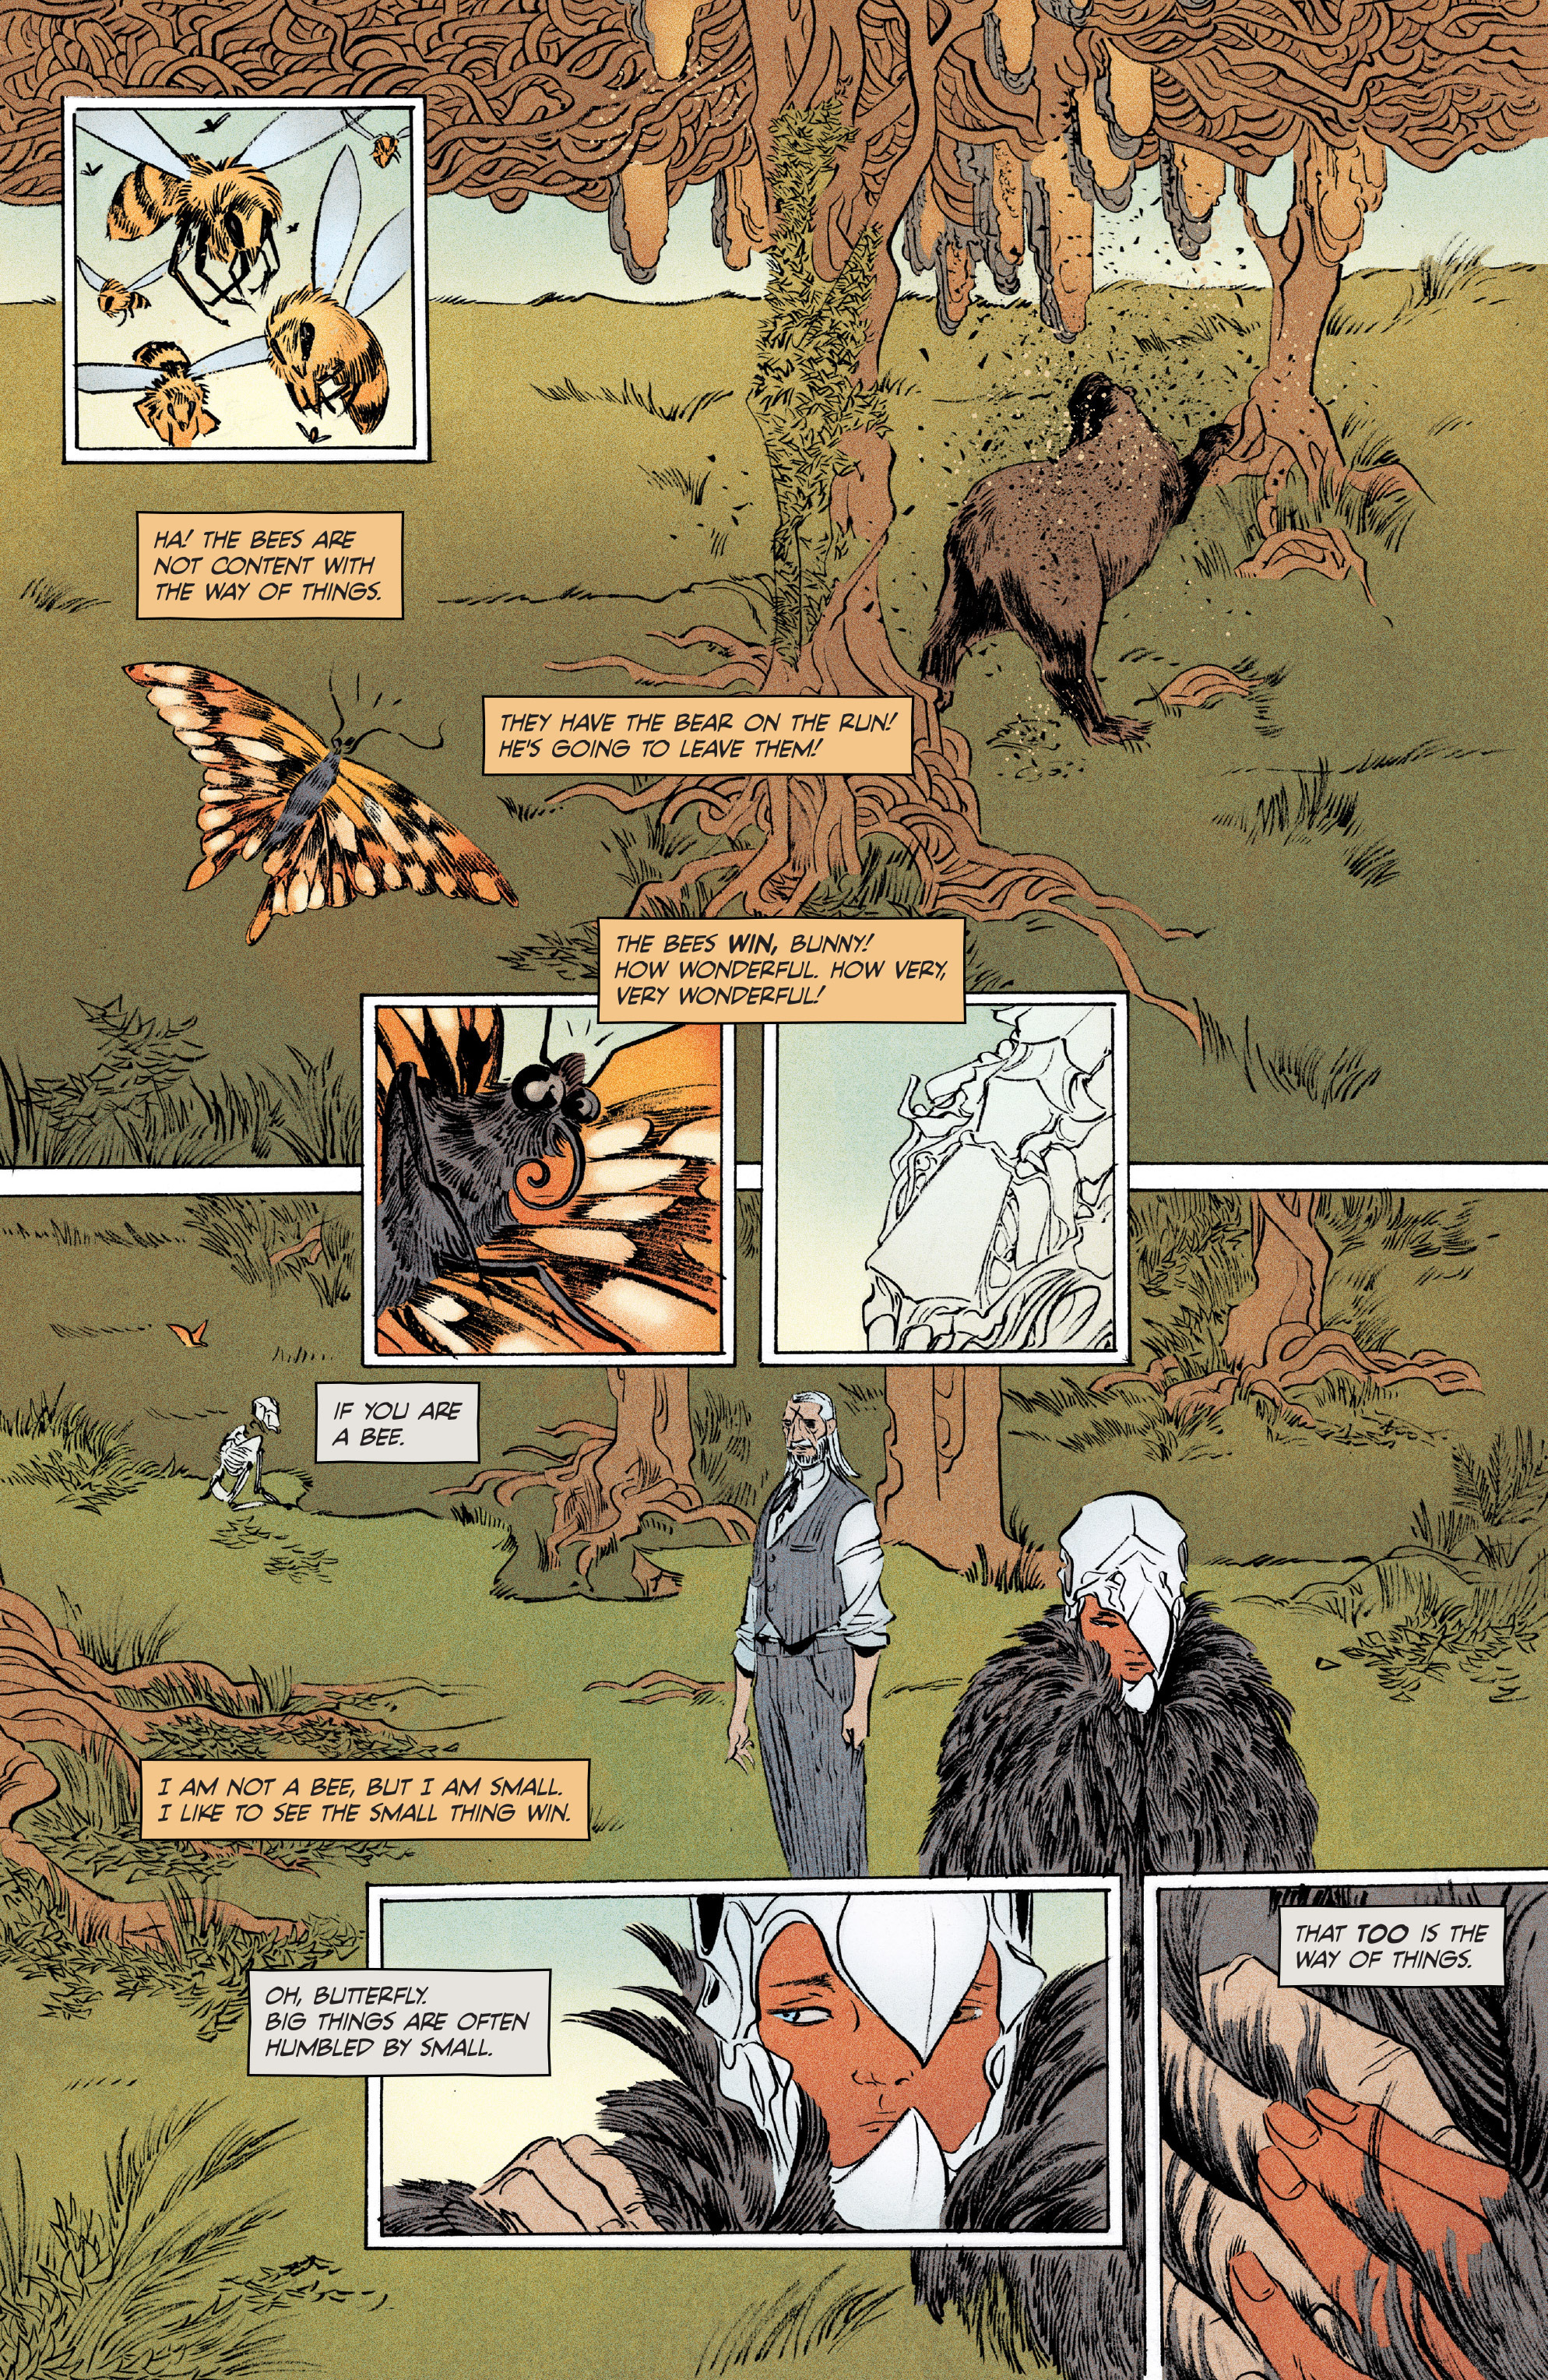 Pretty Deadly (2013-): Chapter 8 - Page 4